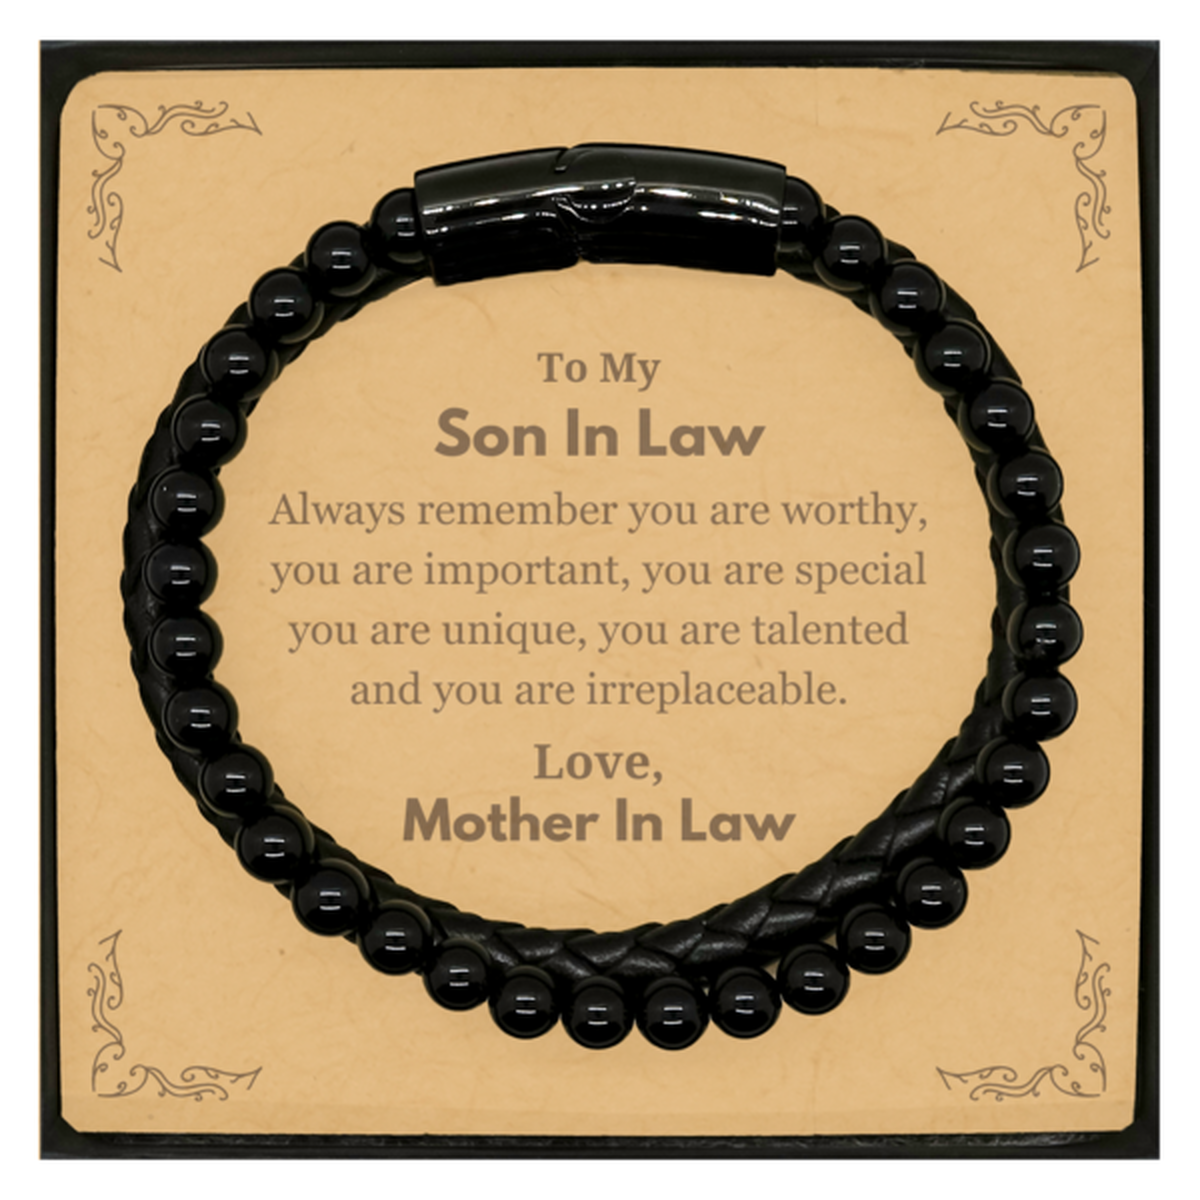 Son In Law Birthday Gifts from Mother In Law, Inspirational Stone Leather Bracelets for Son In Law Christmas Graduation Gifts for Son In Law Always remember you are worthy, you are important. Love, Mother In Law